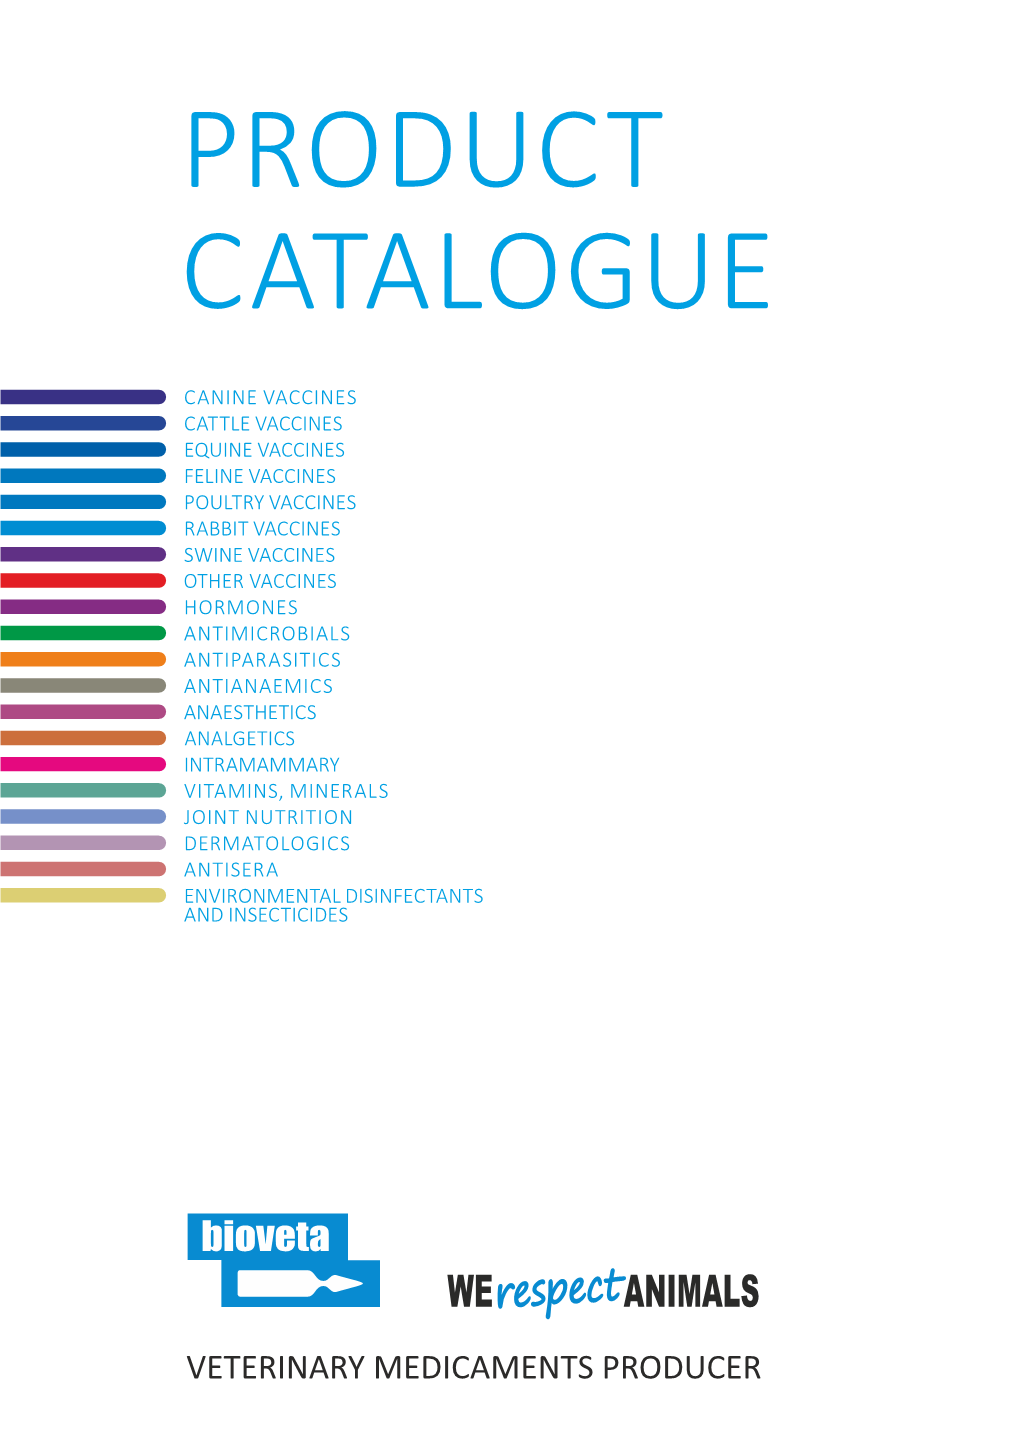 Complete Product Catalogue 2019 (GB)